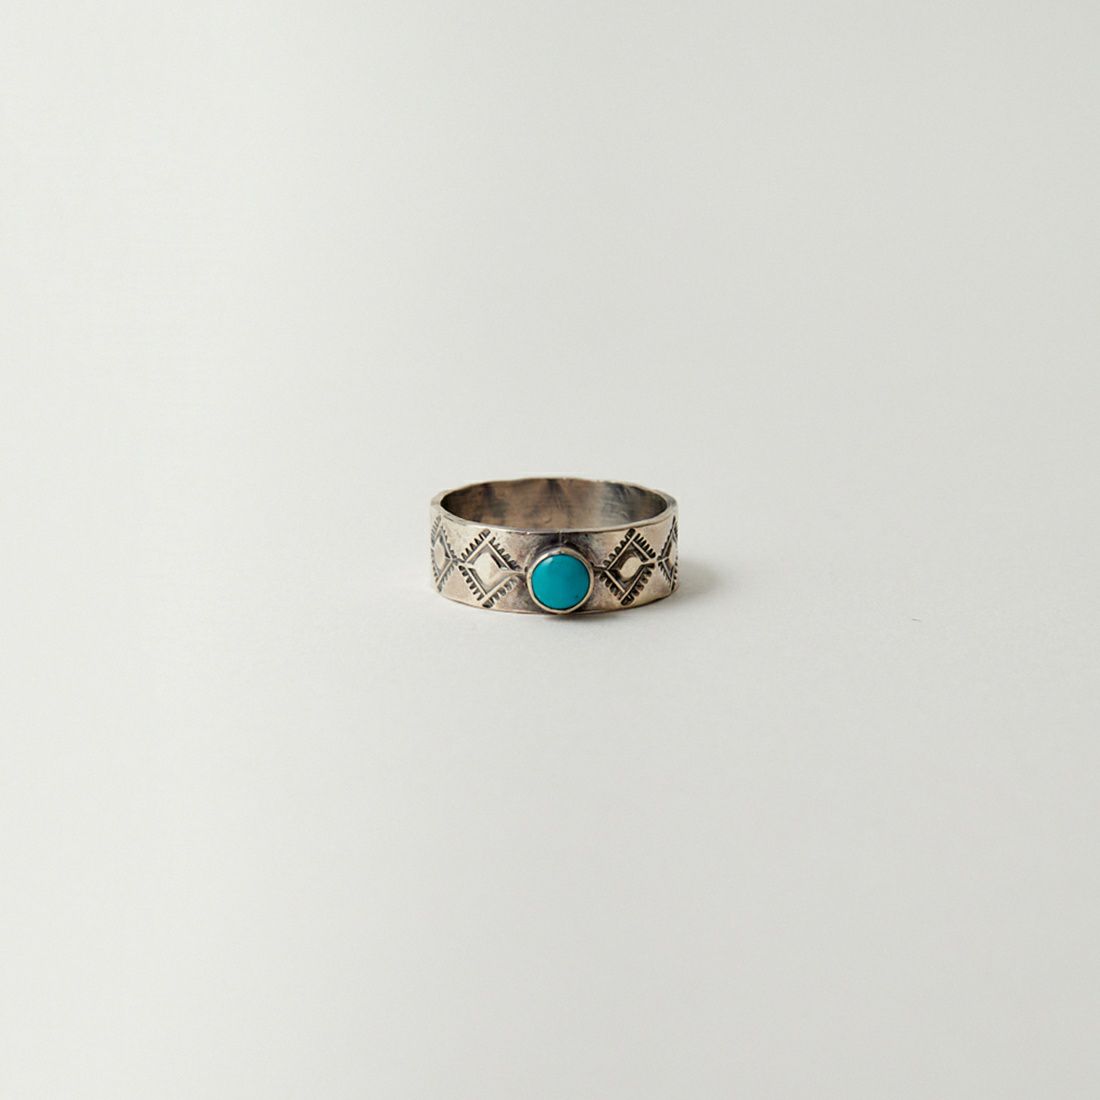 Indian Jewelry [インディアンジュエリー] ターコイズリング [TURQUOISE-RING]